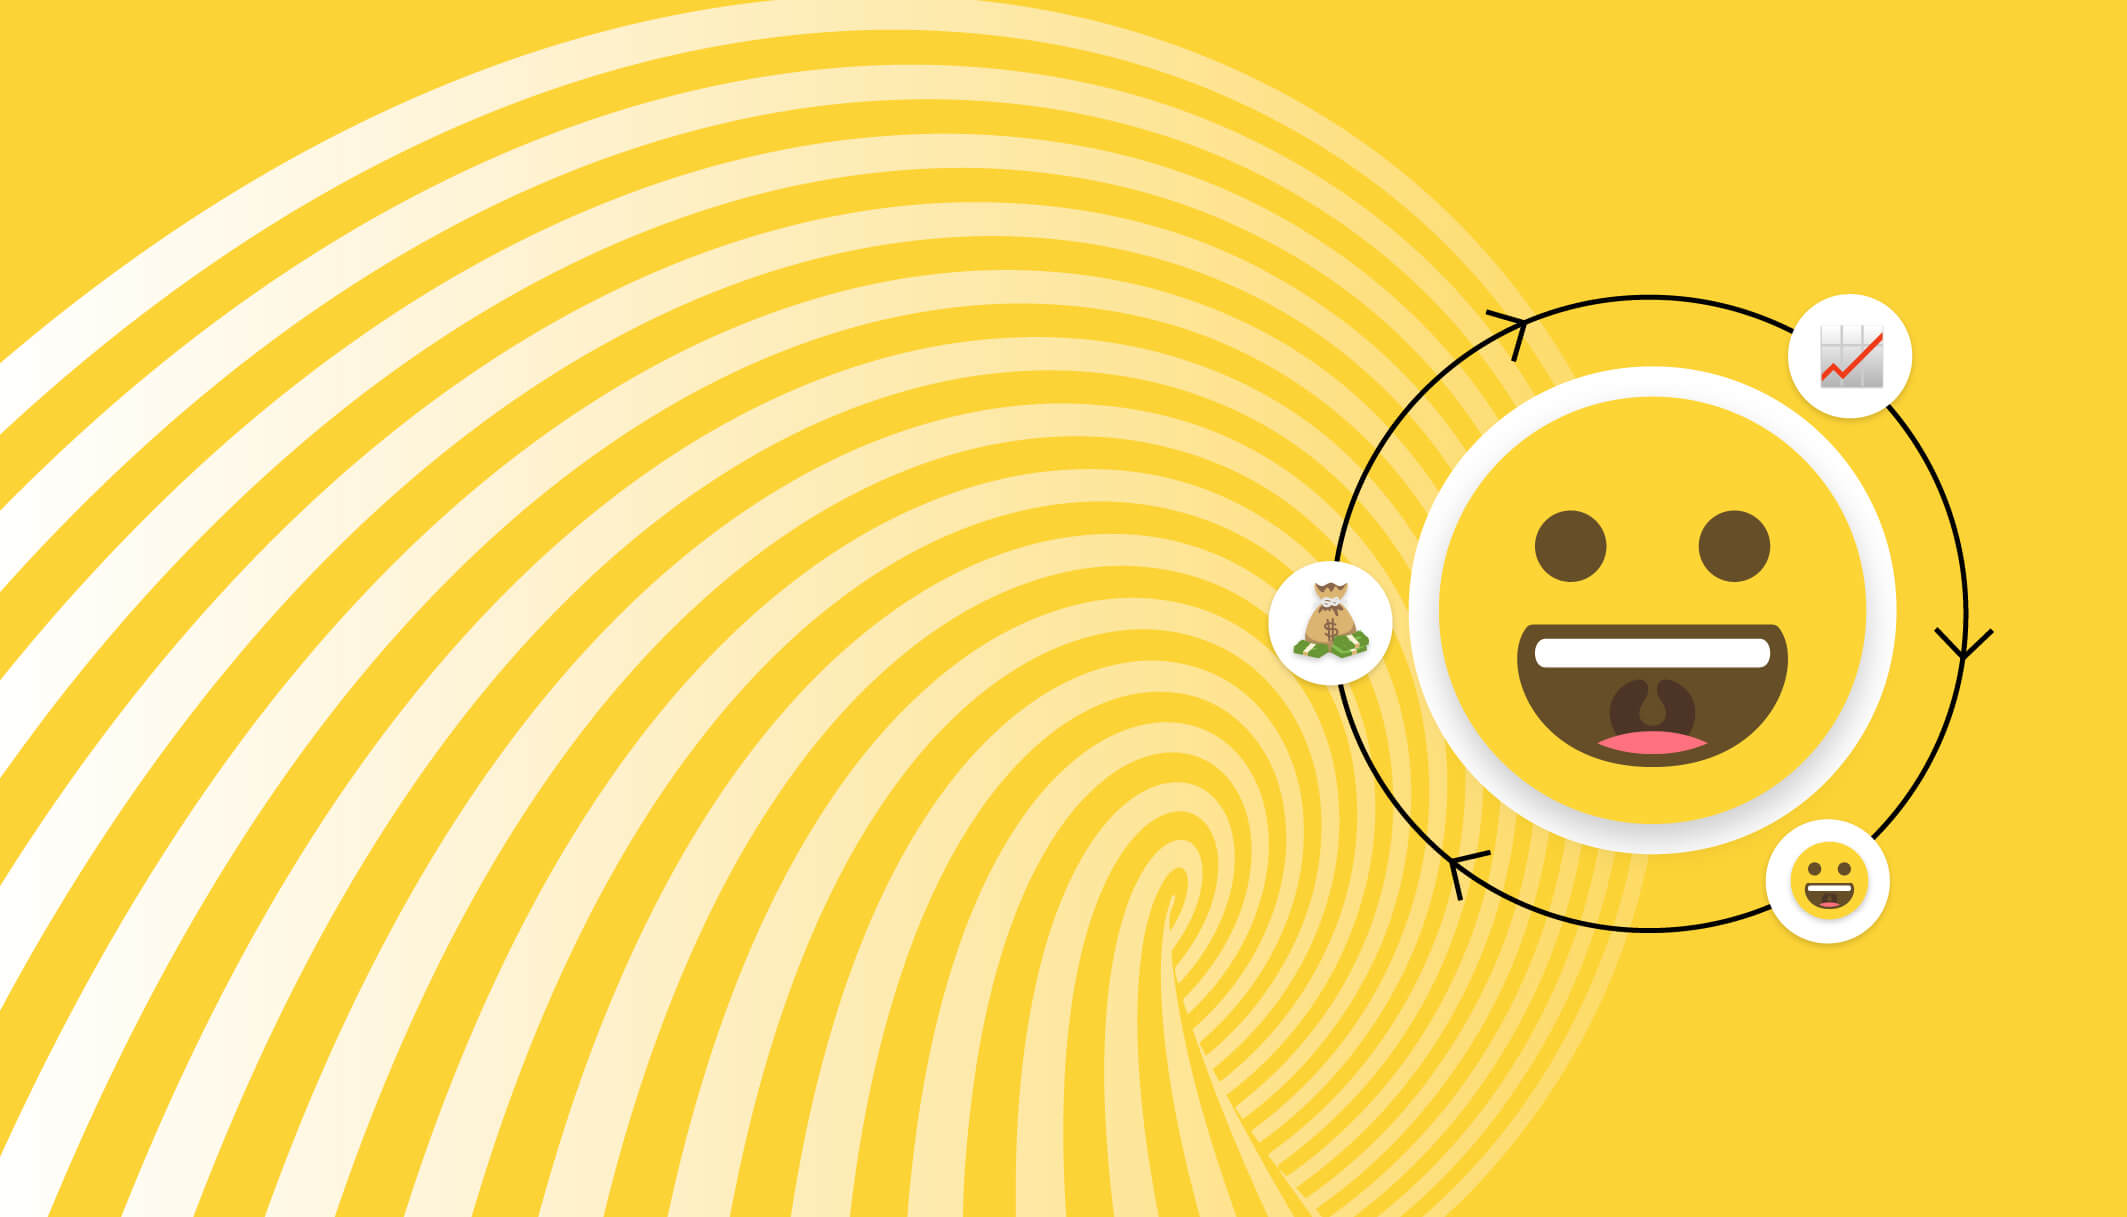 Smiley face on yellow background